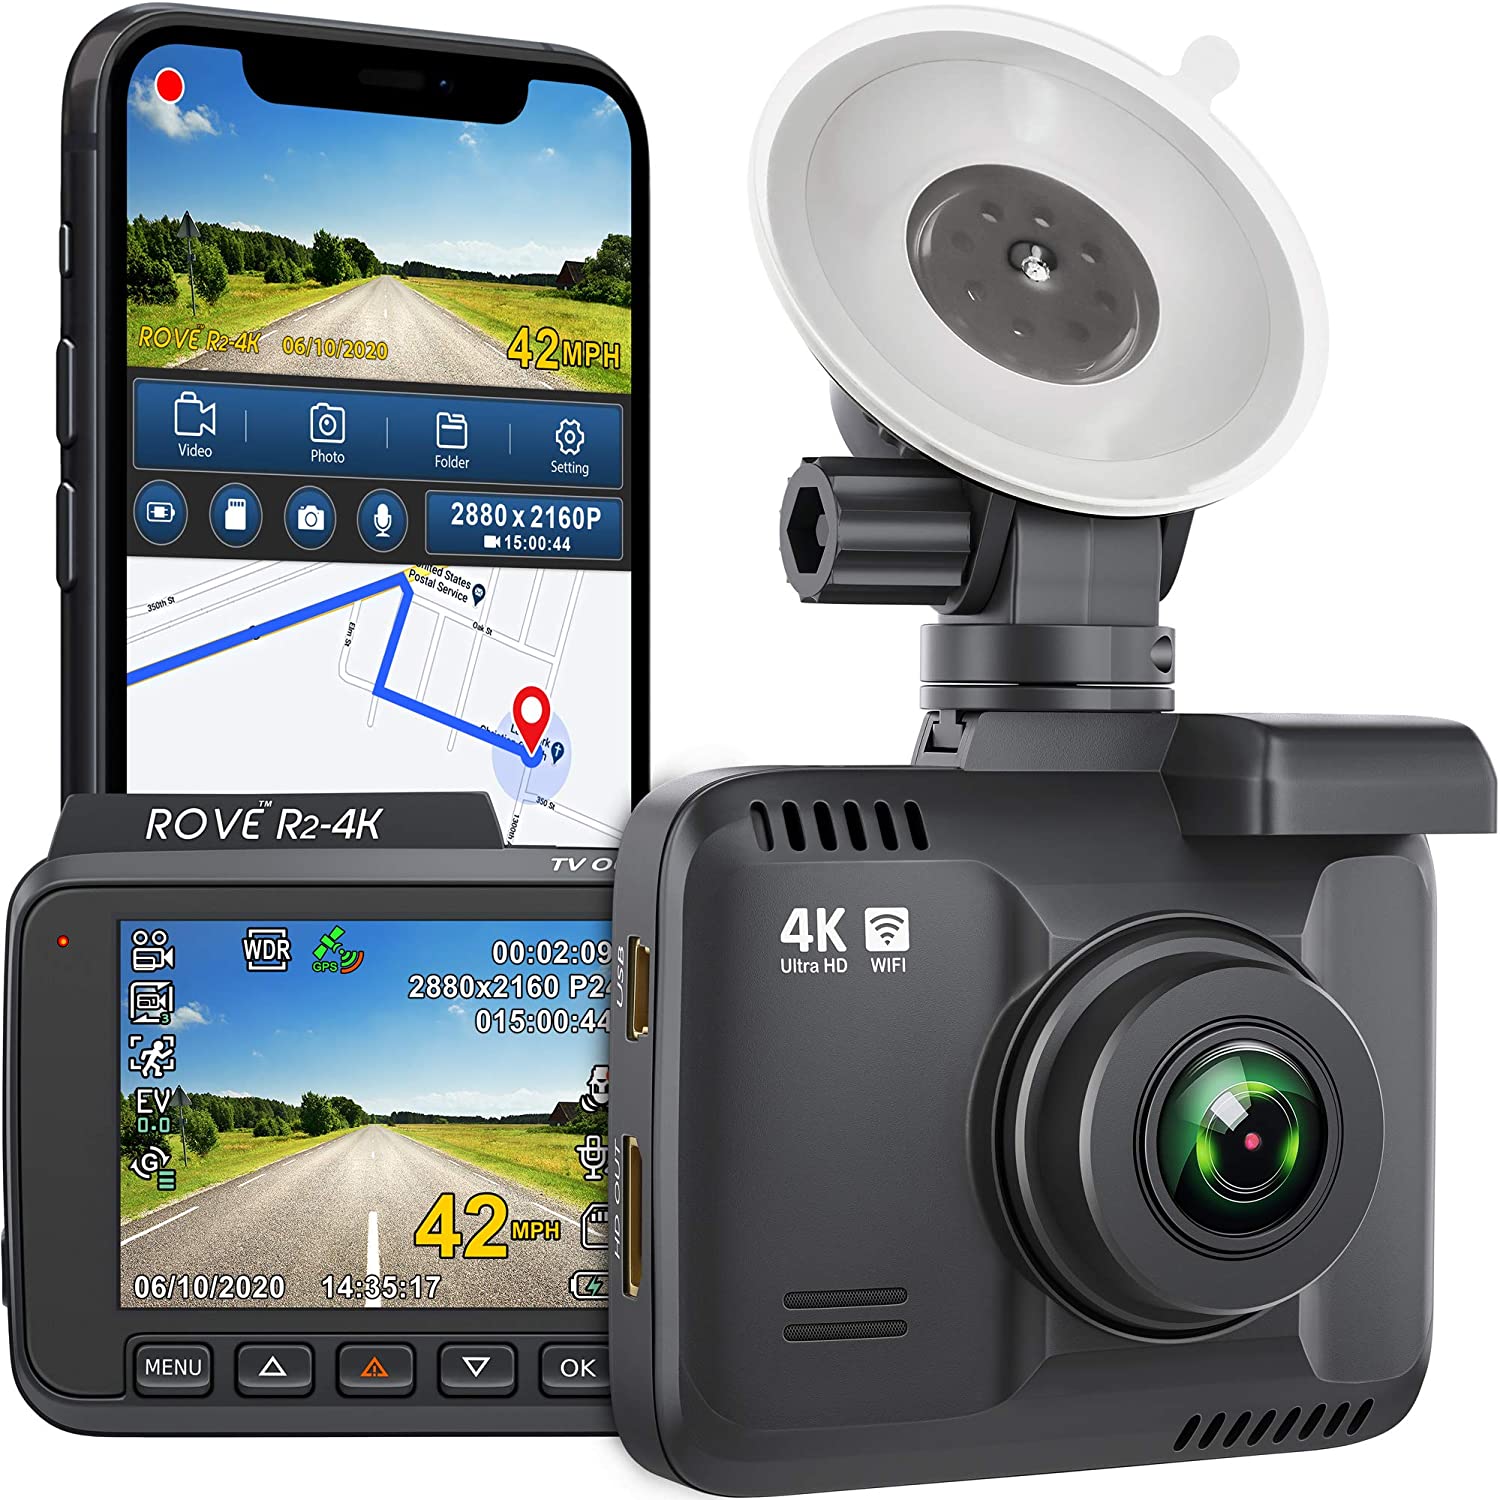 Rove R2- 4K Dash Cam Built in WiFi GPS Car Dashboard Camera Recorder with UHD 2160P, 2.4" LCD, 150° Wide Angle, WDR, Night Vision